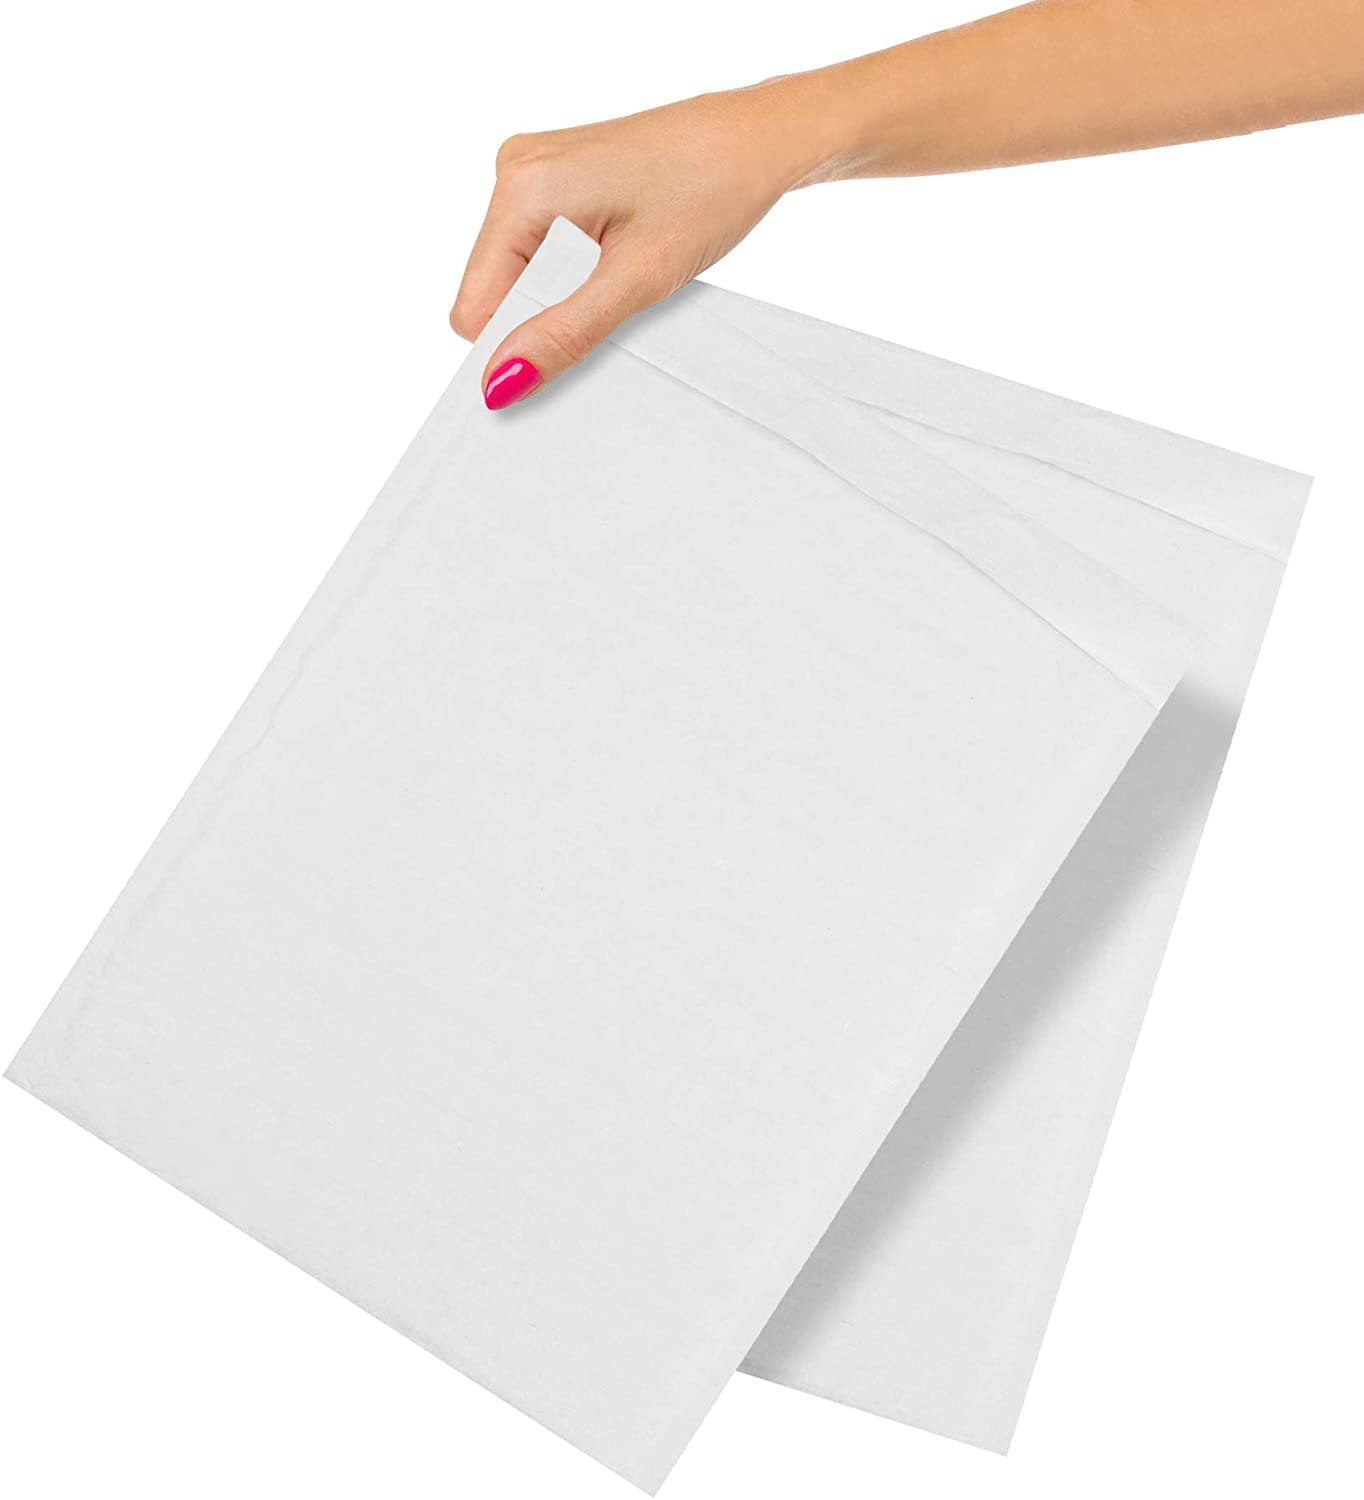 400 9.5x14.5 POLY USA Bubble Mailers Envelopes Bags 100 % Recyclabe Size #4 